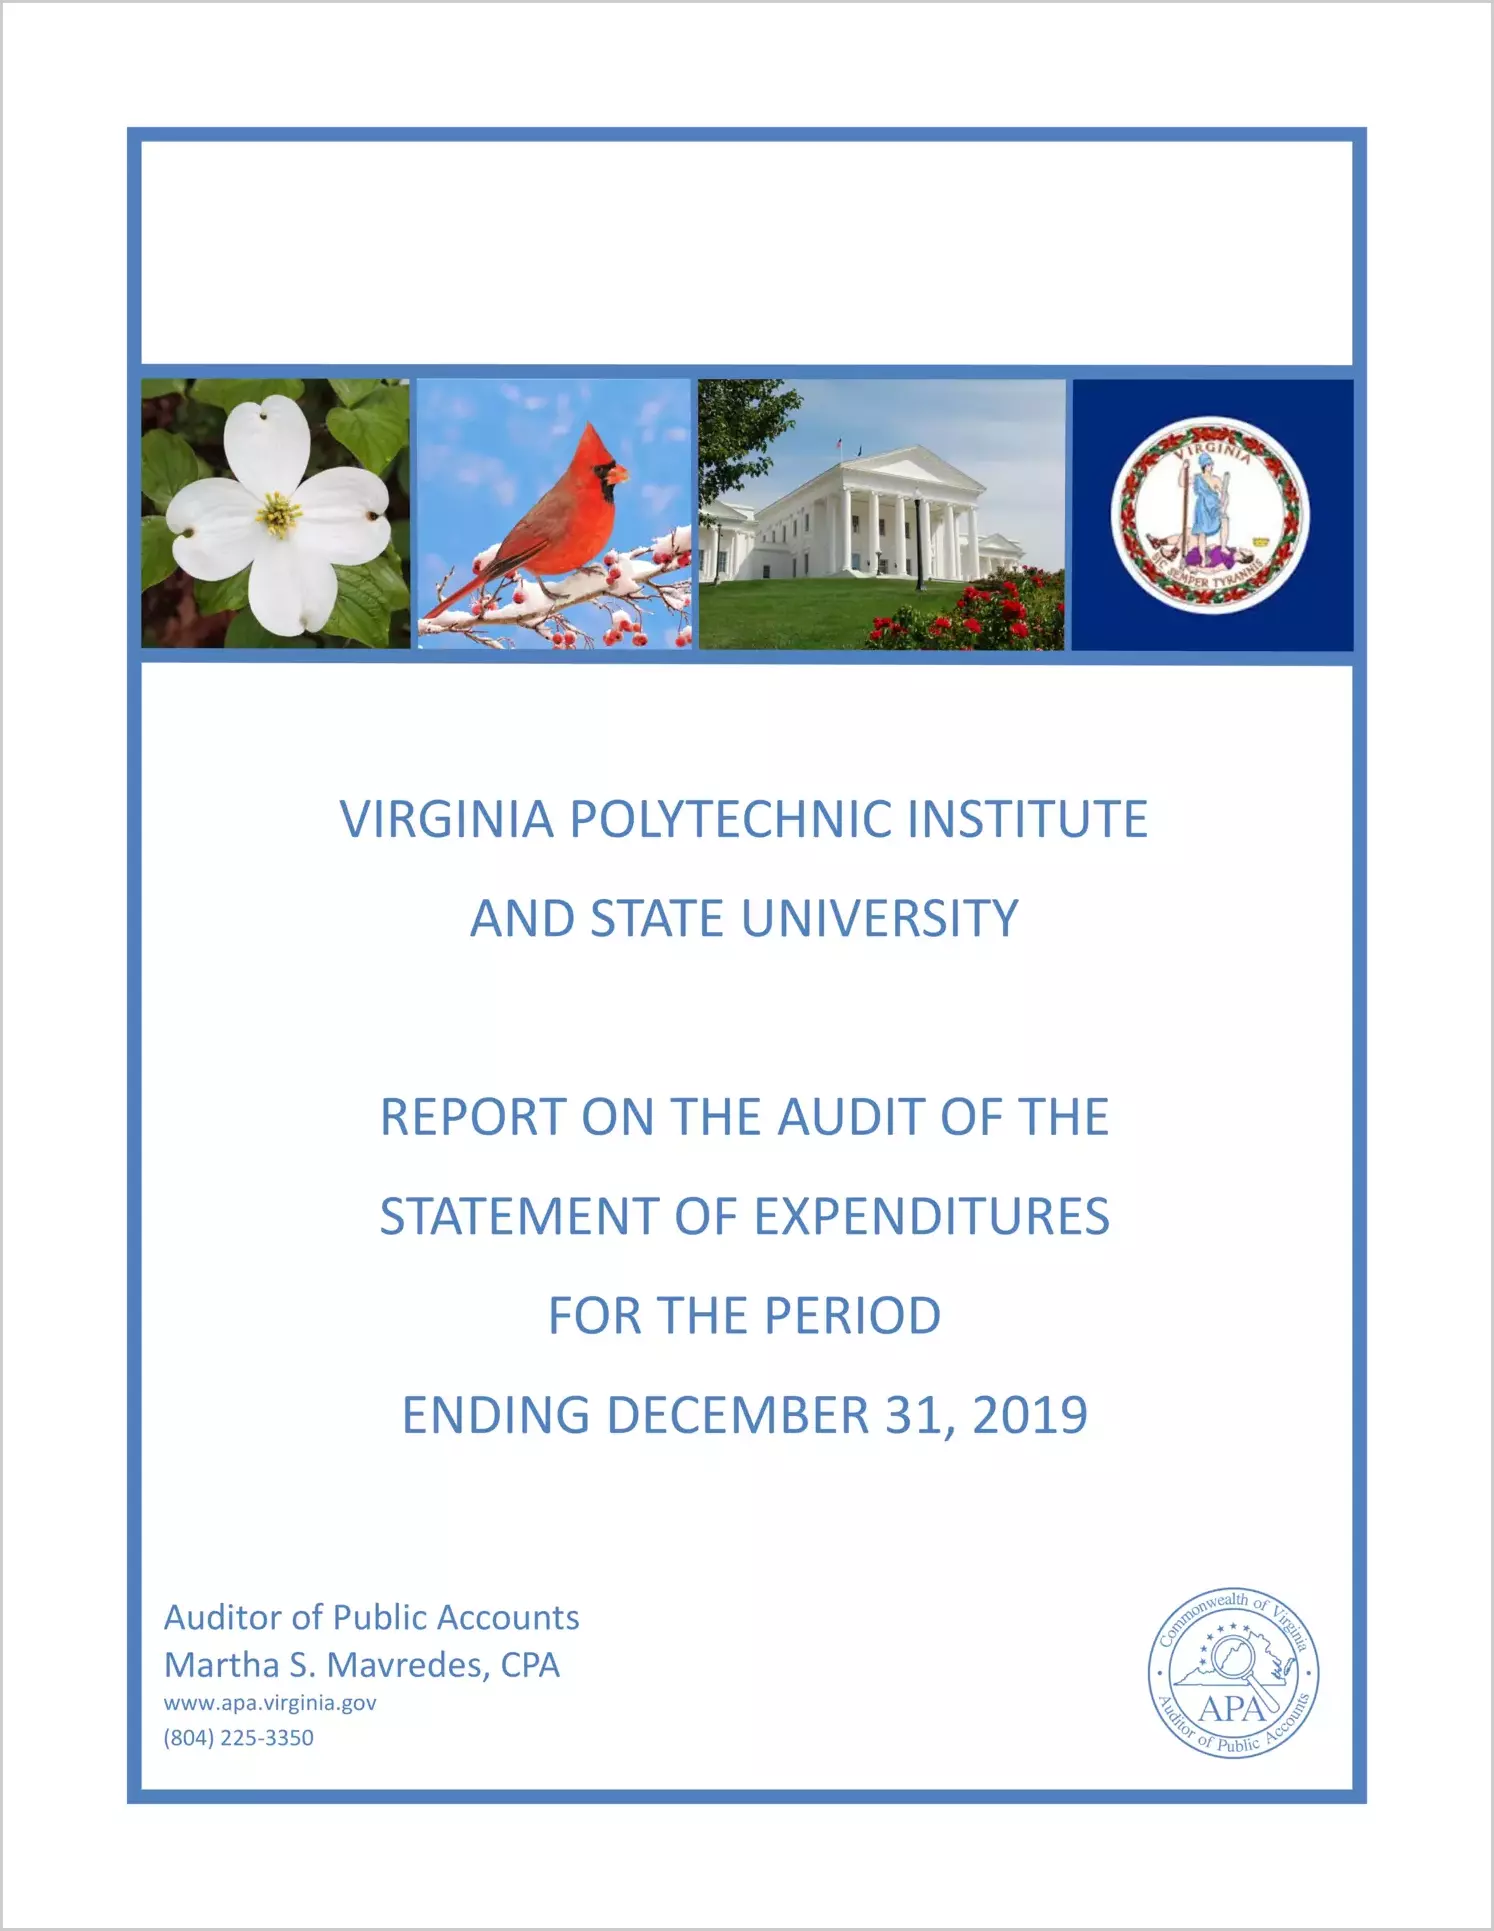 Virginia Polytechnic Institute and State University Report on Statement of Expenditures 2019